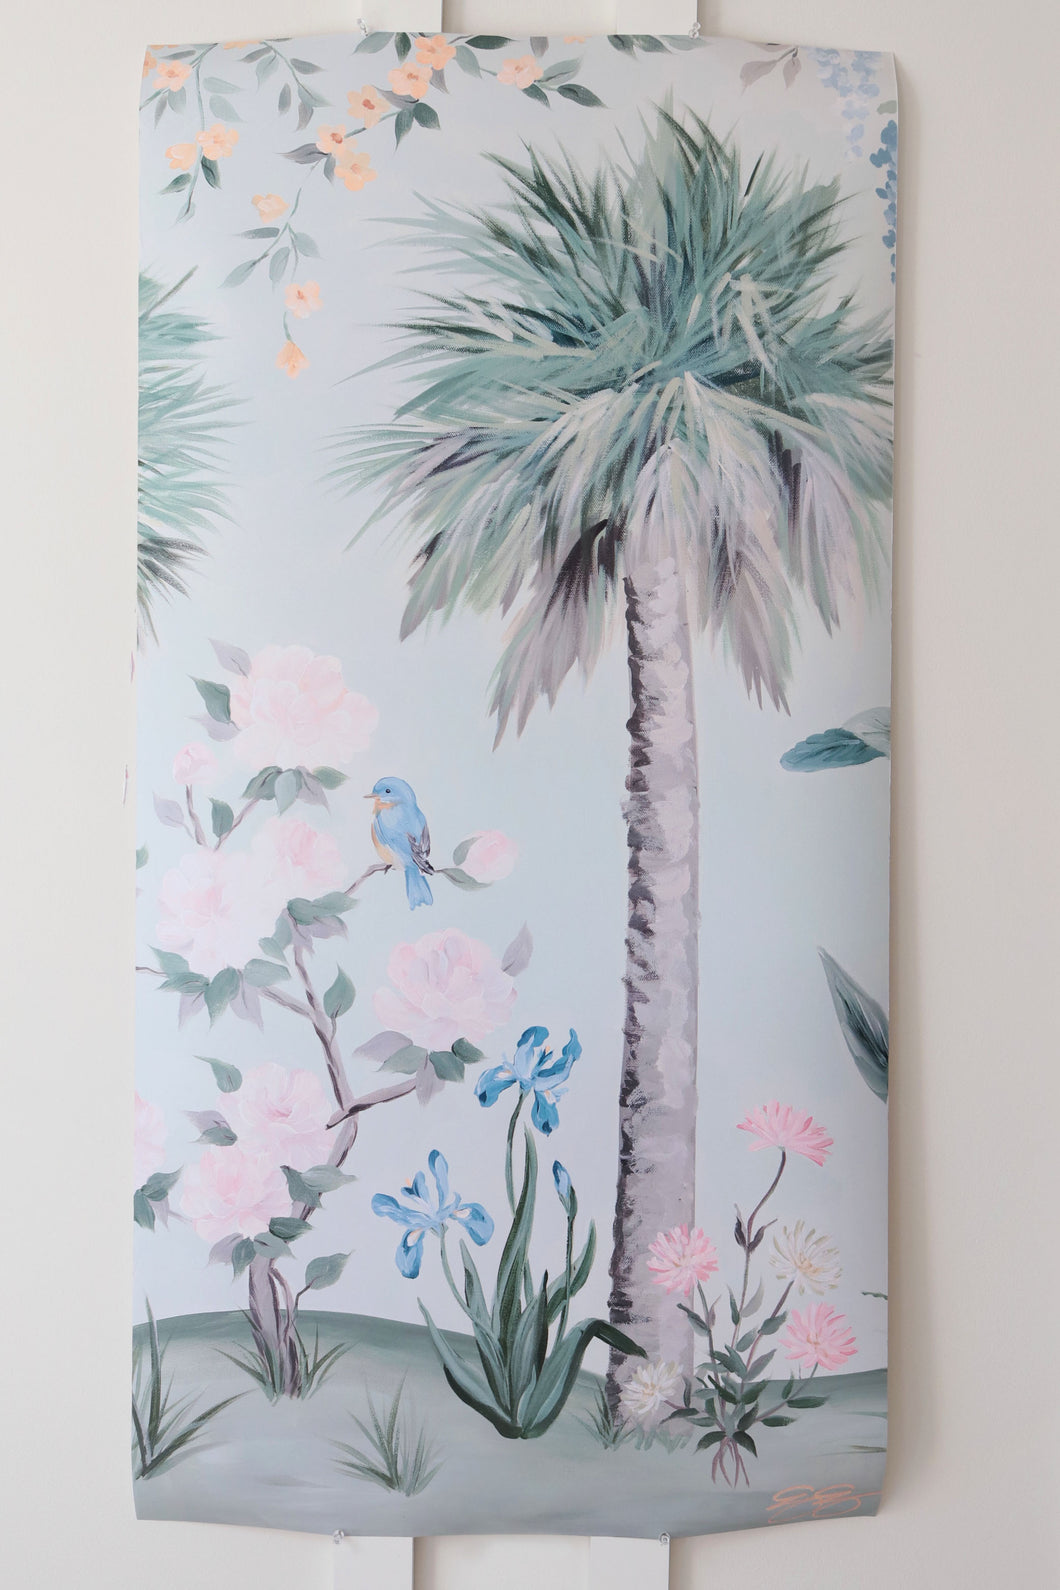 Eve chinoiserie - 24 x 48 print on paper